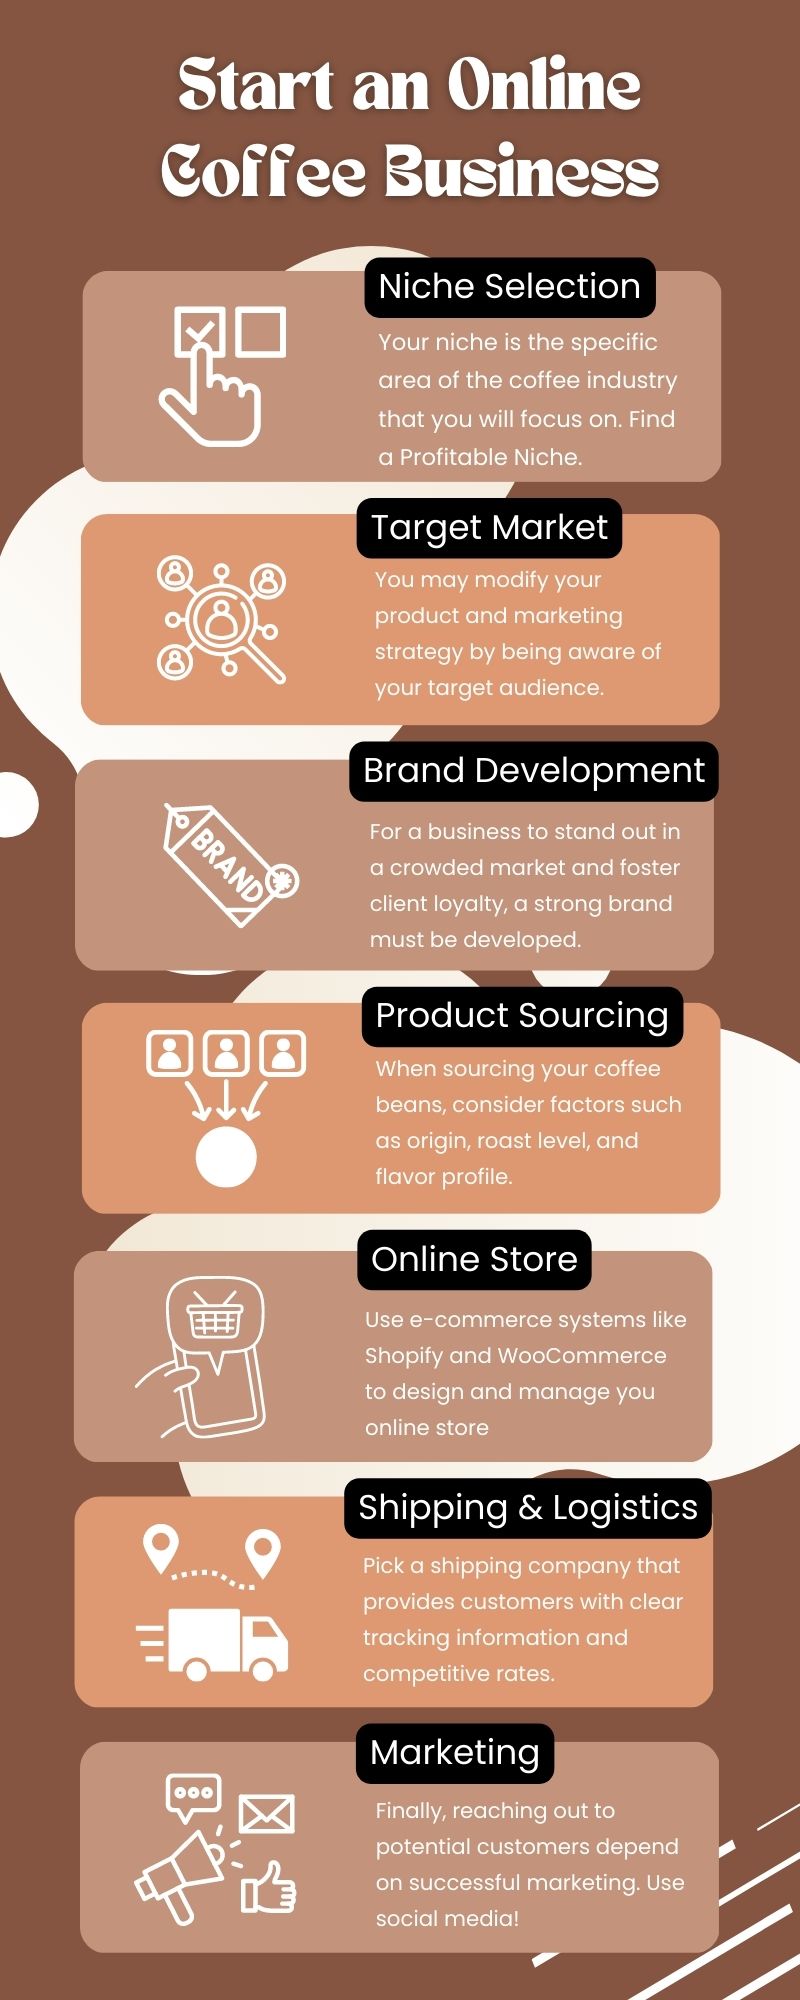 Start-an-Online-Coffee-Business-Infographic